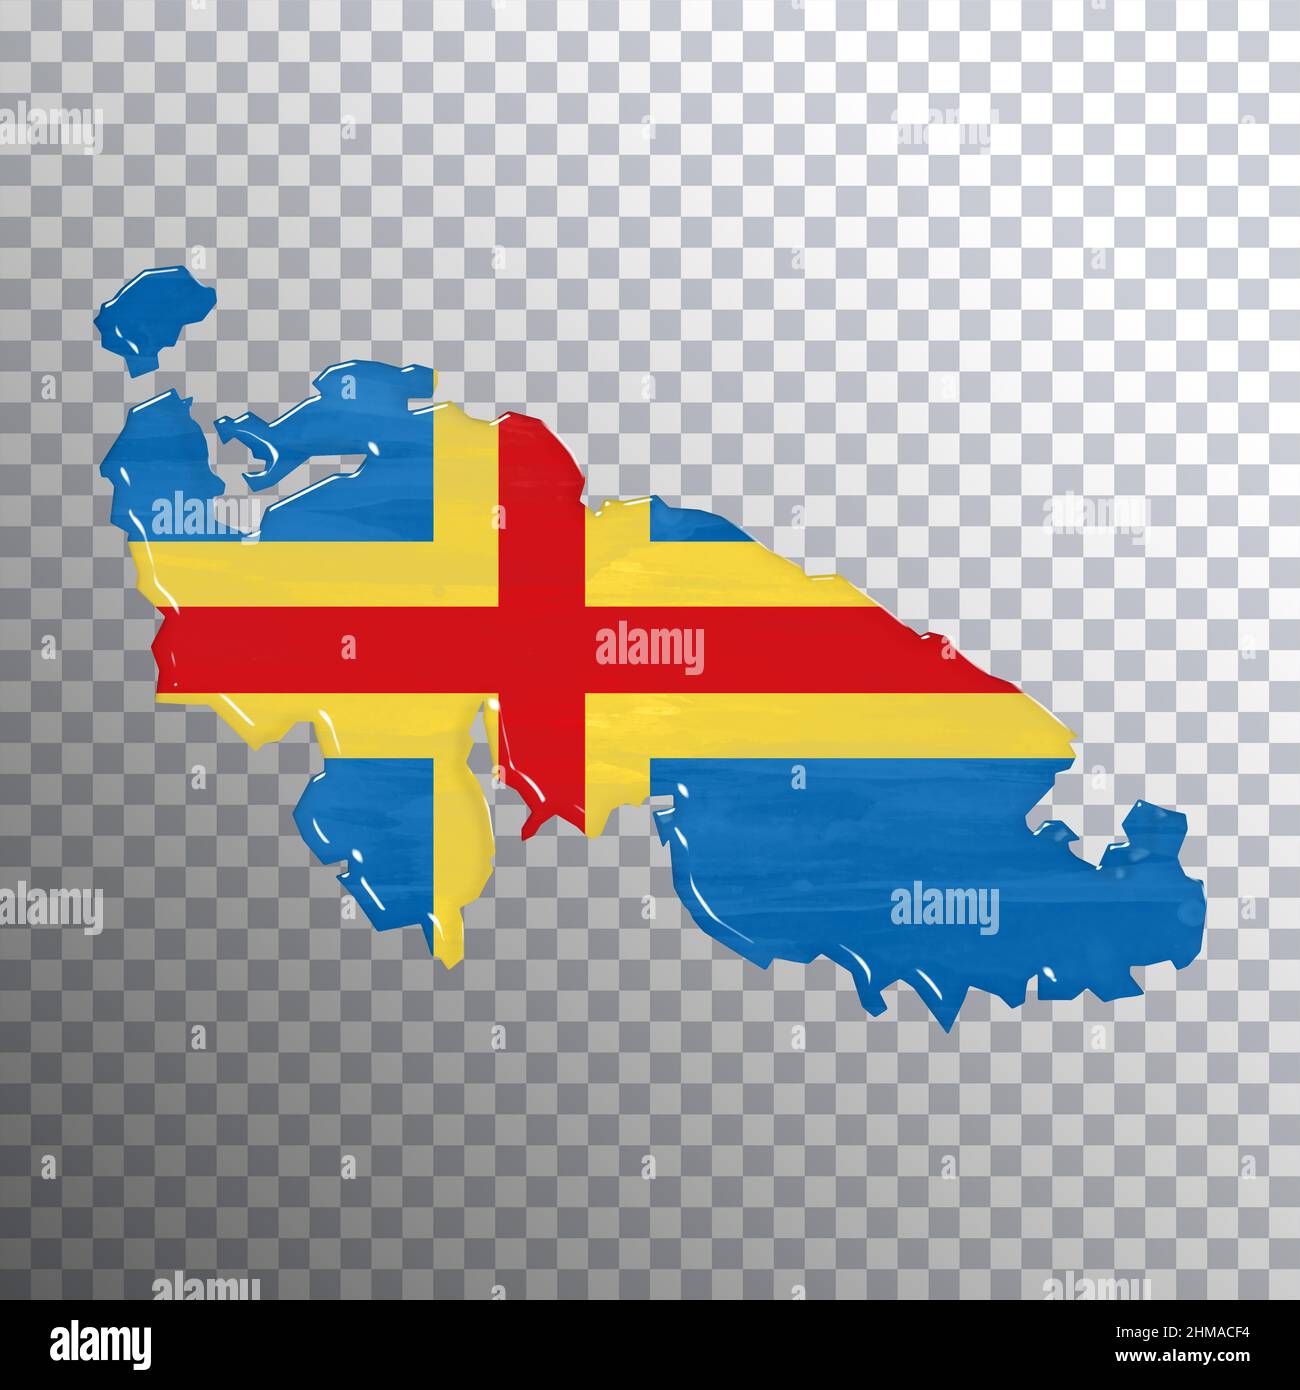 Aland Islands flag and map, transparent background, Clipping path Stock Photo